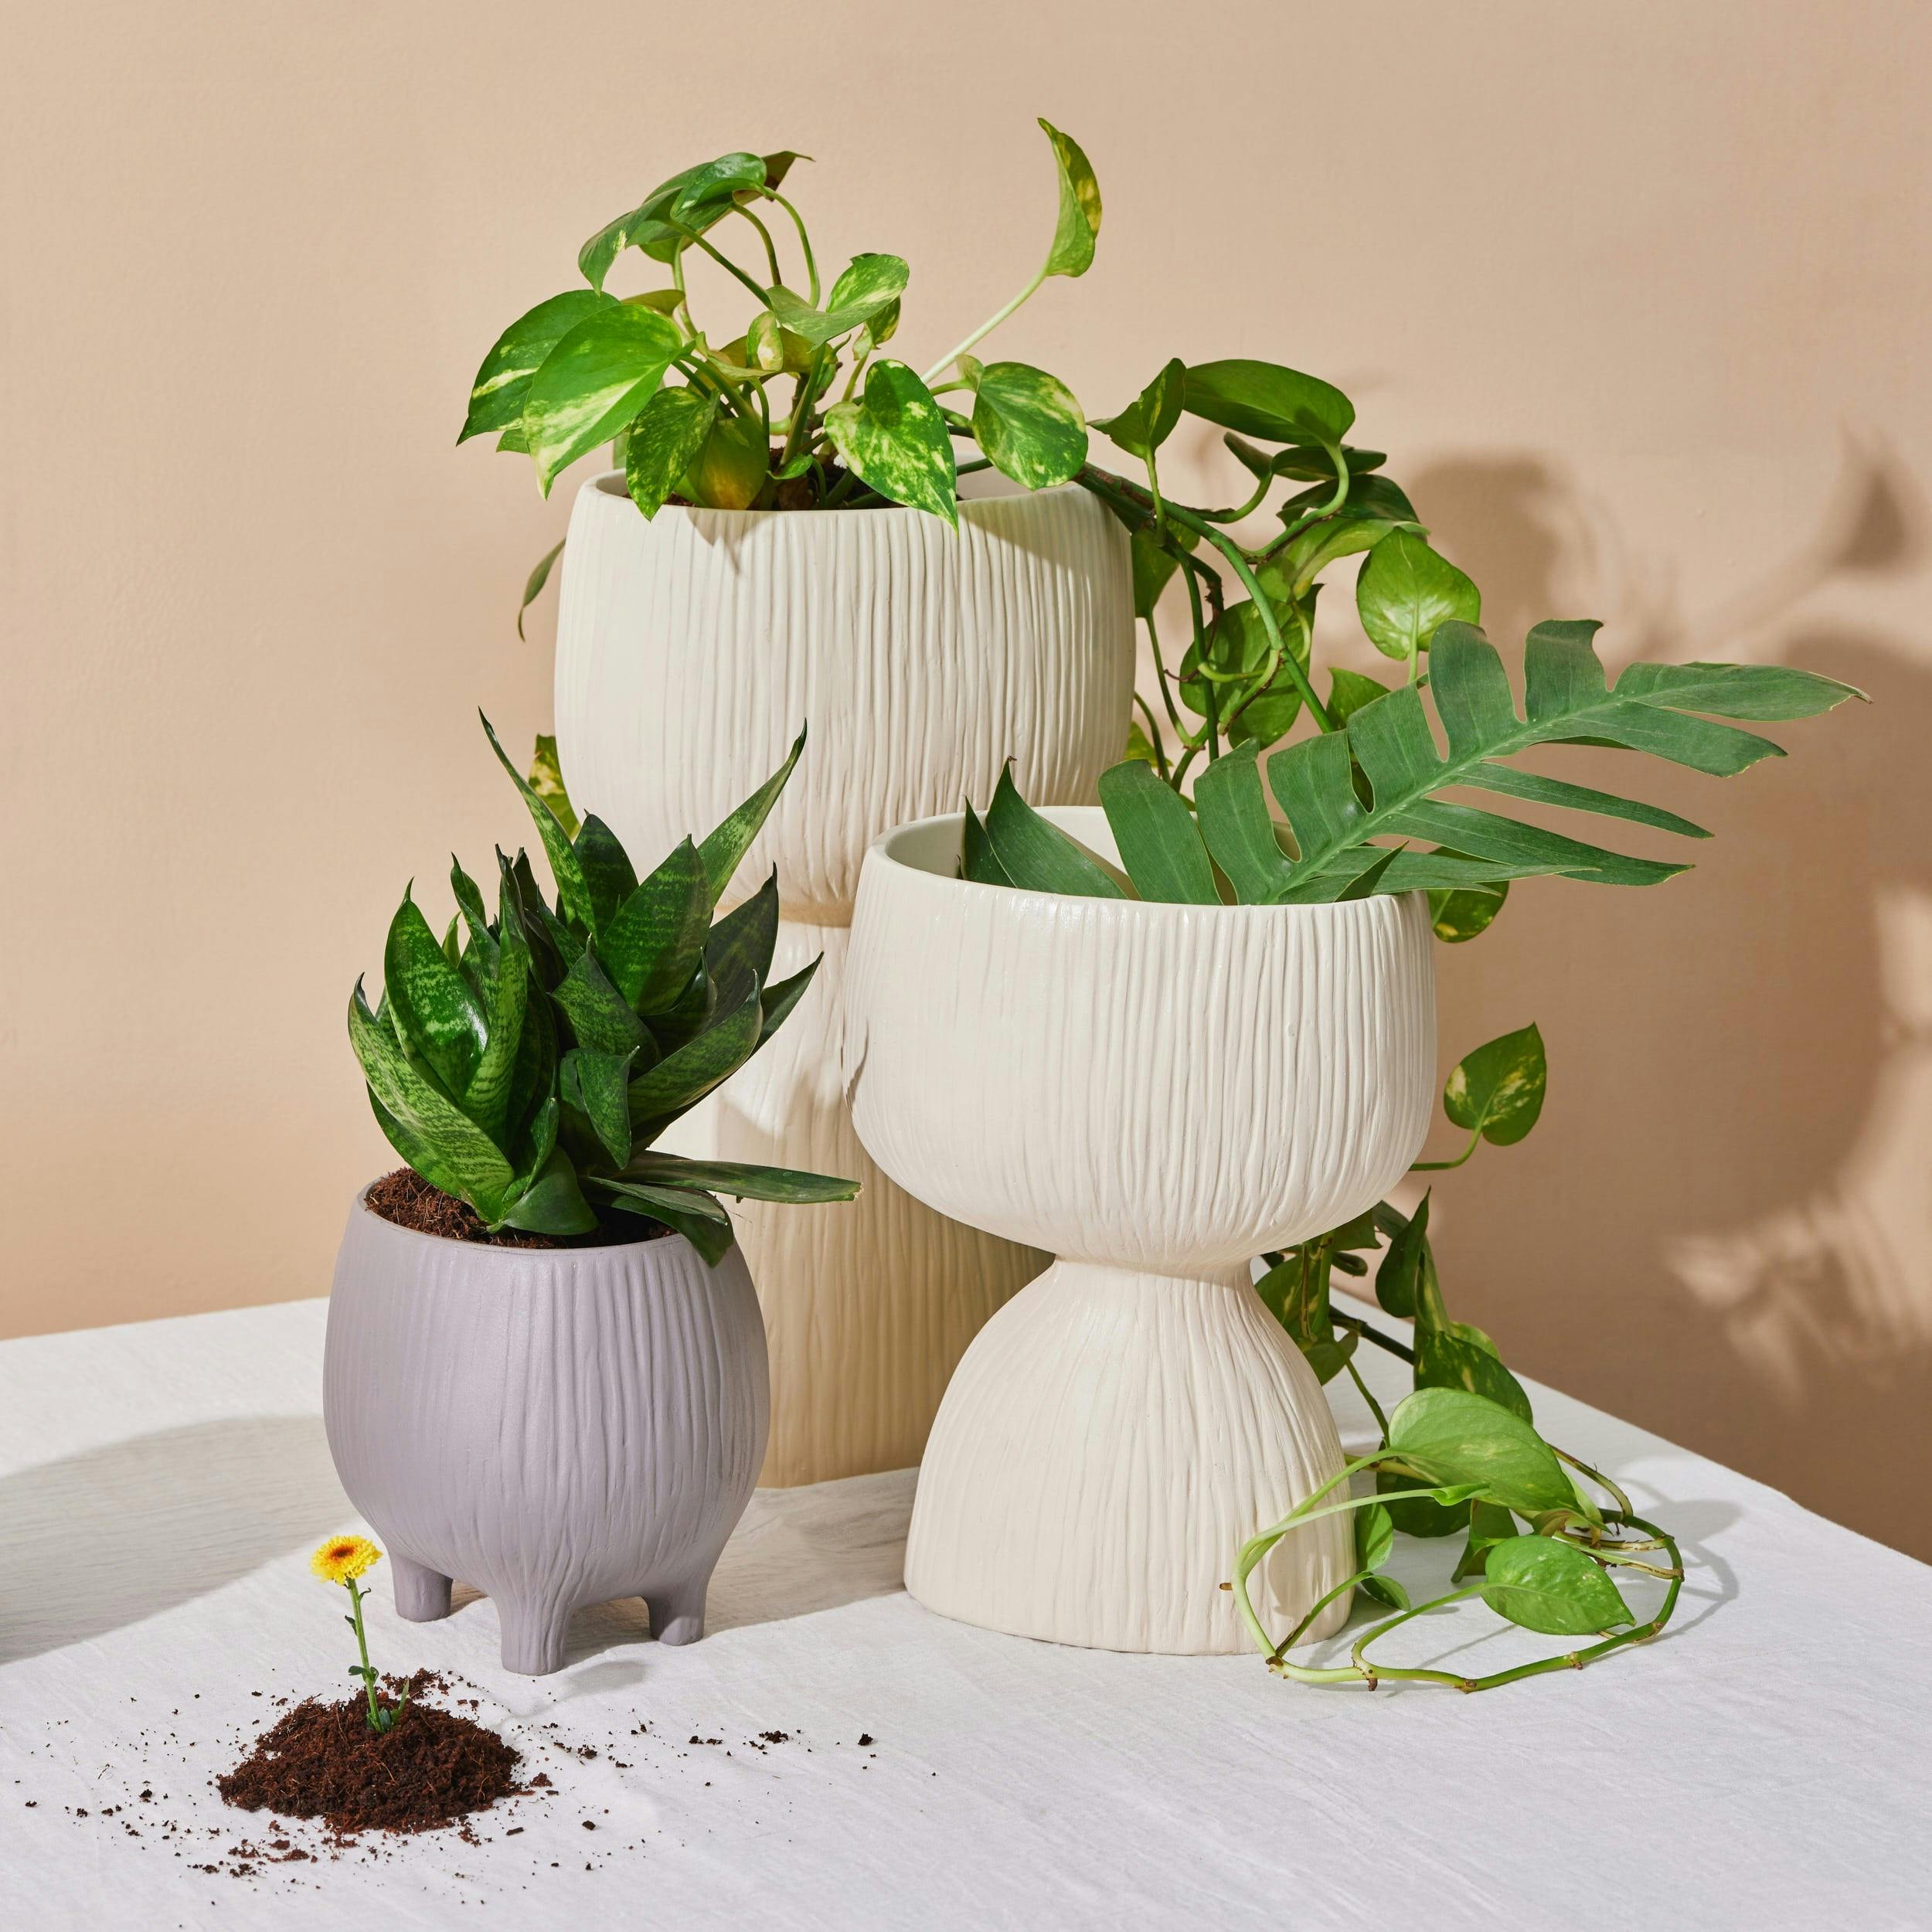 Aden Organic Planter, a product by Hello December